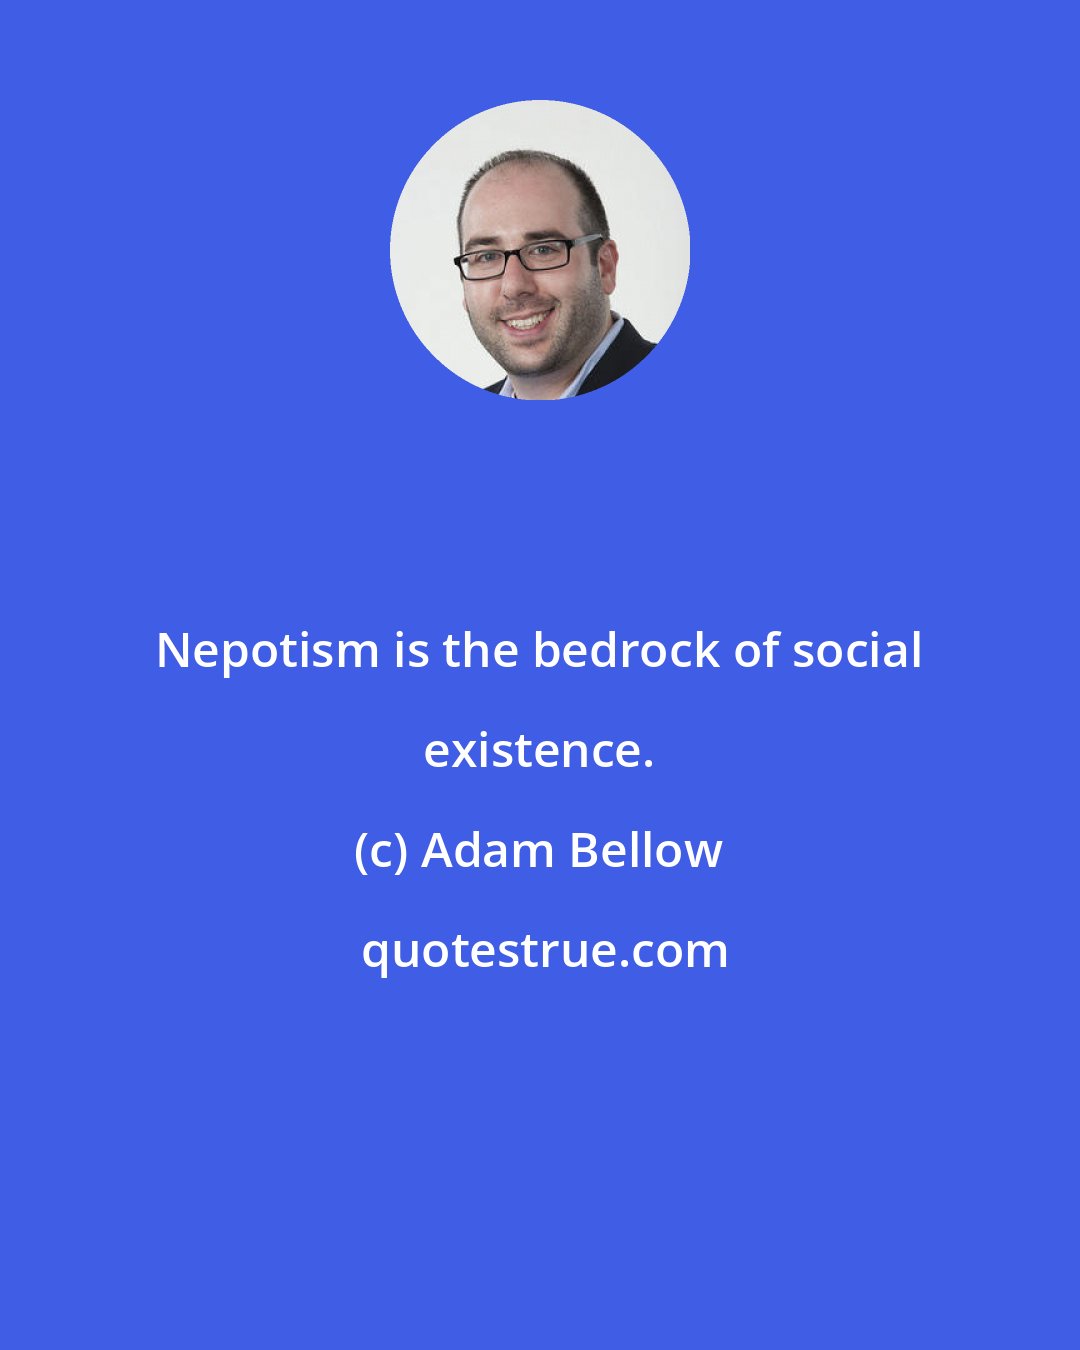 Adam Bellow: Nepotism is the bedrock of social existence.